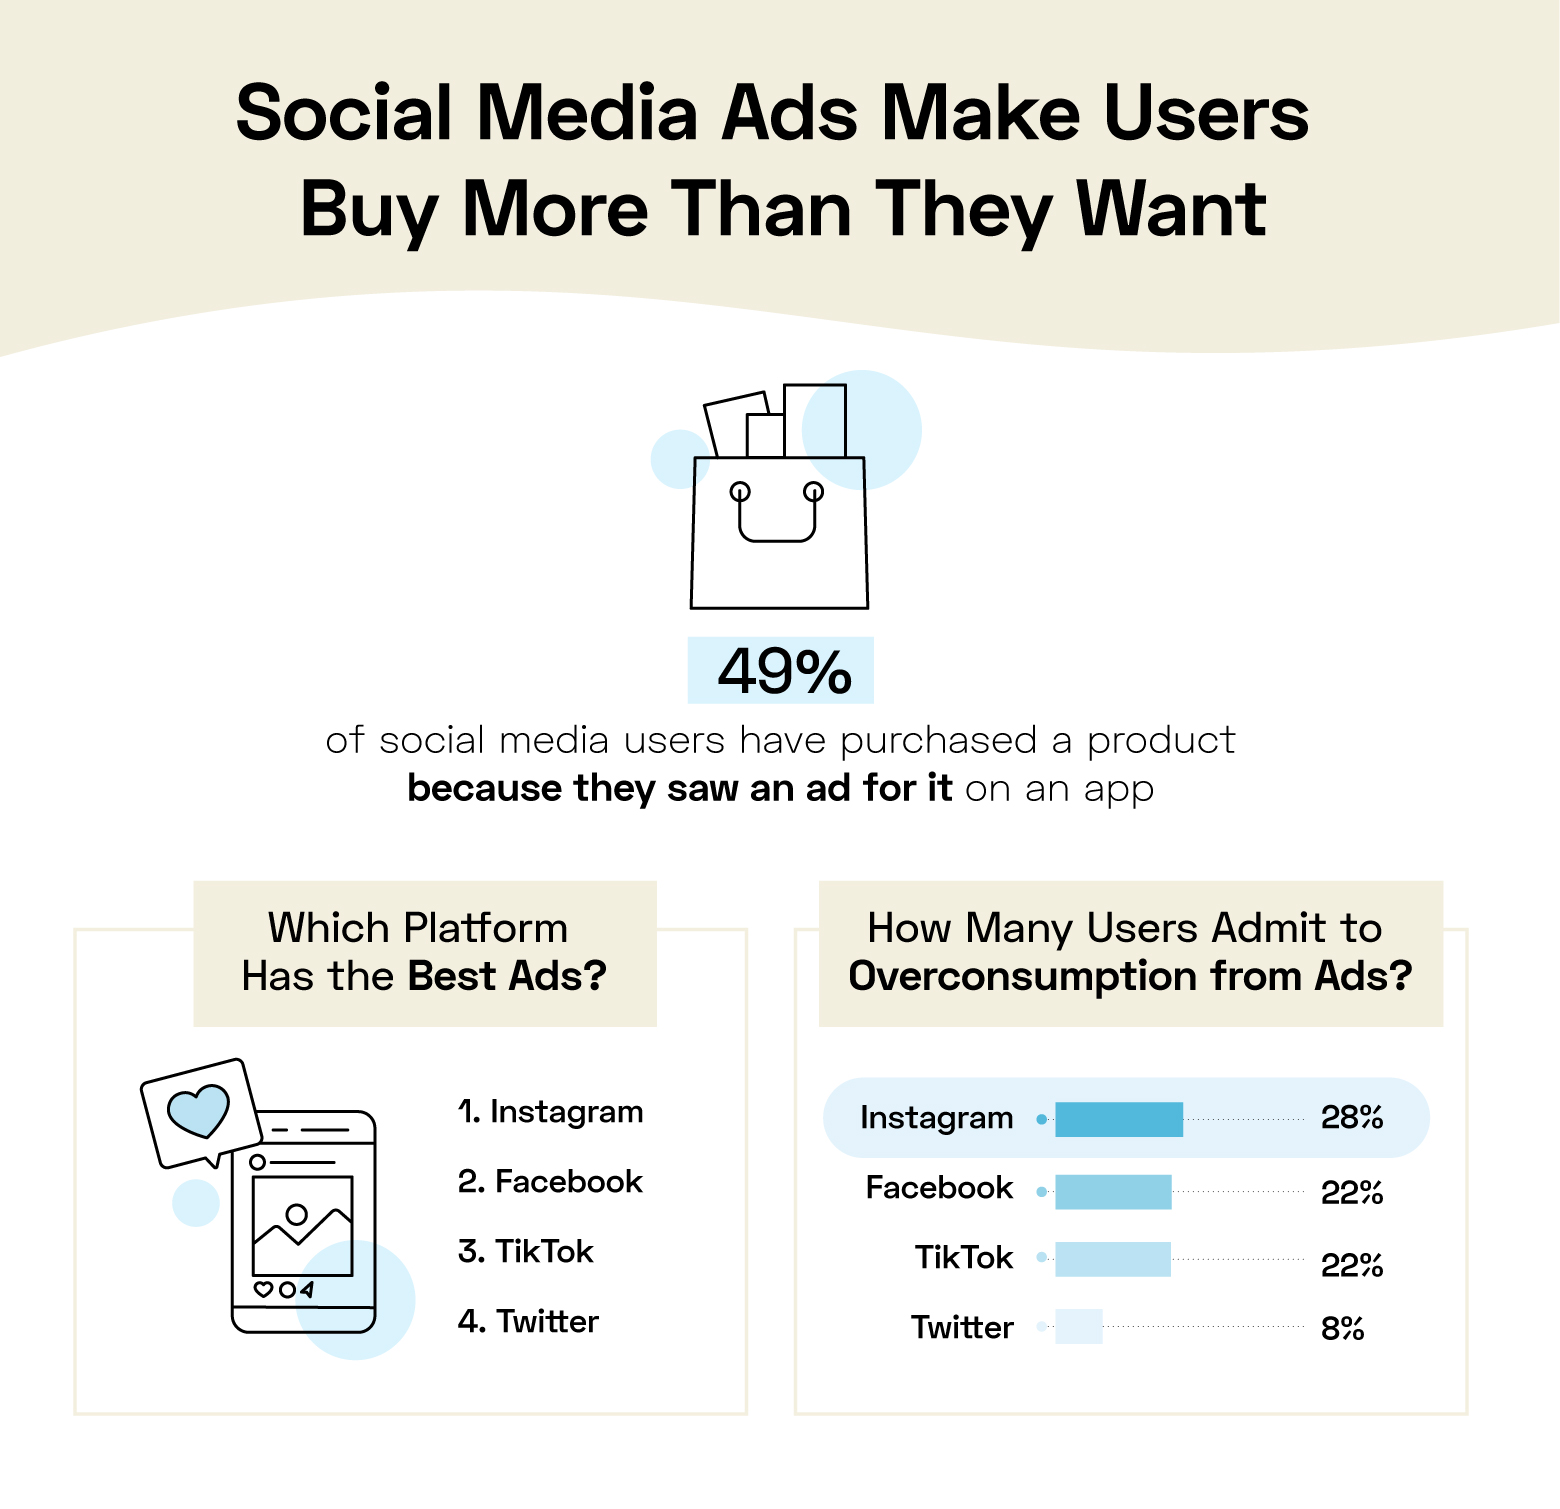 ads on social make users buy more than they want